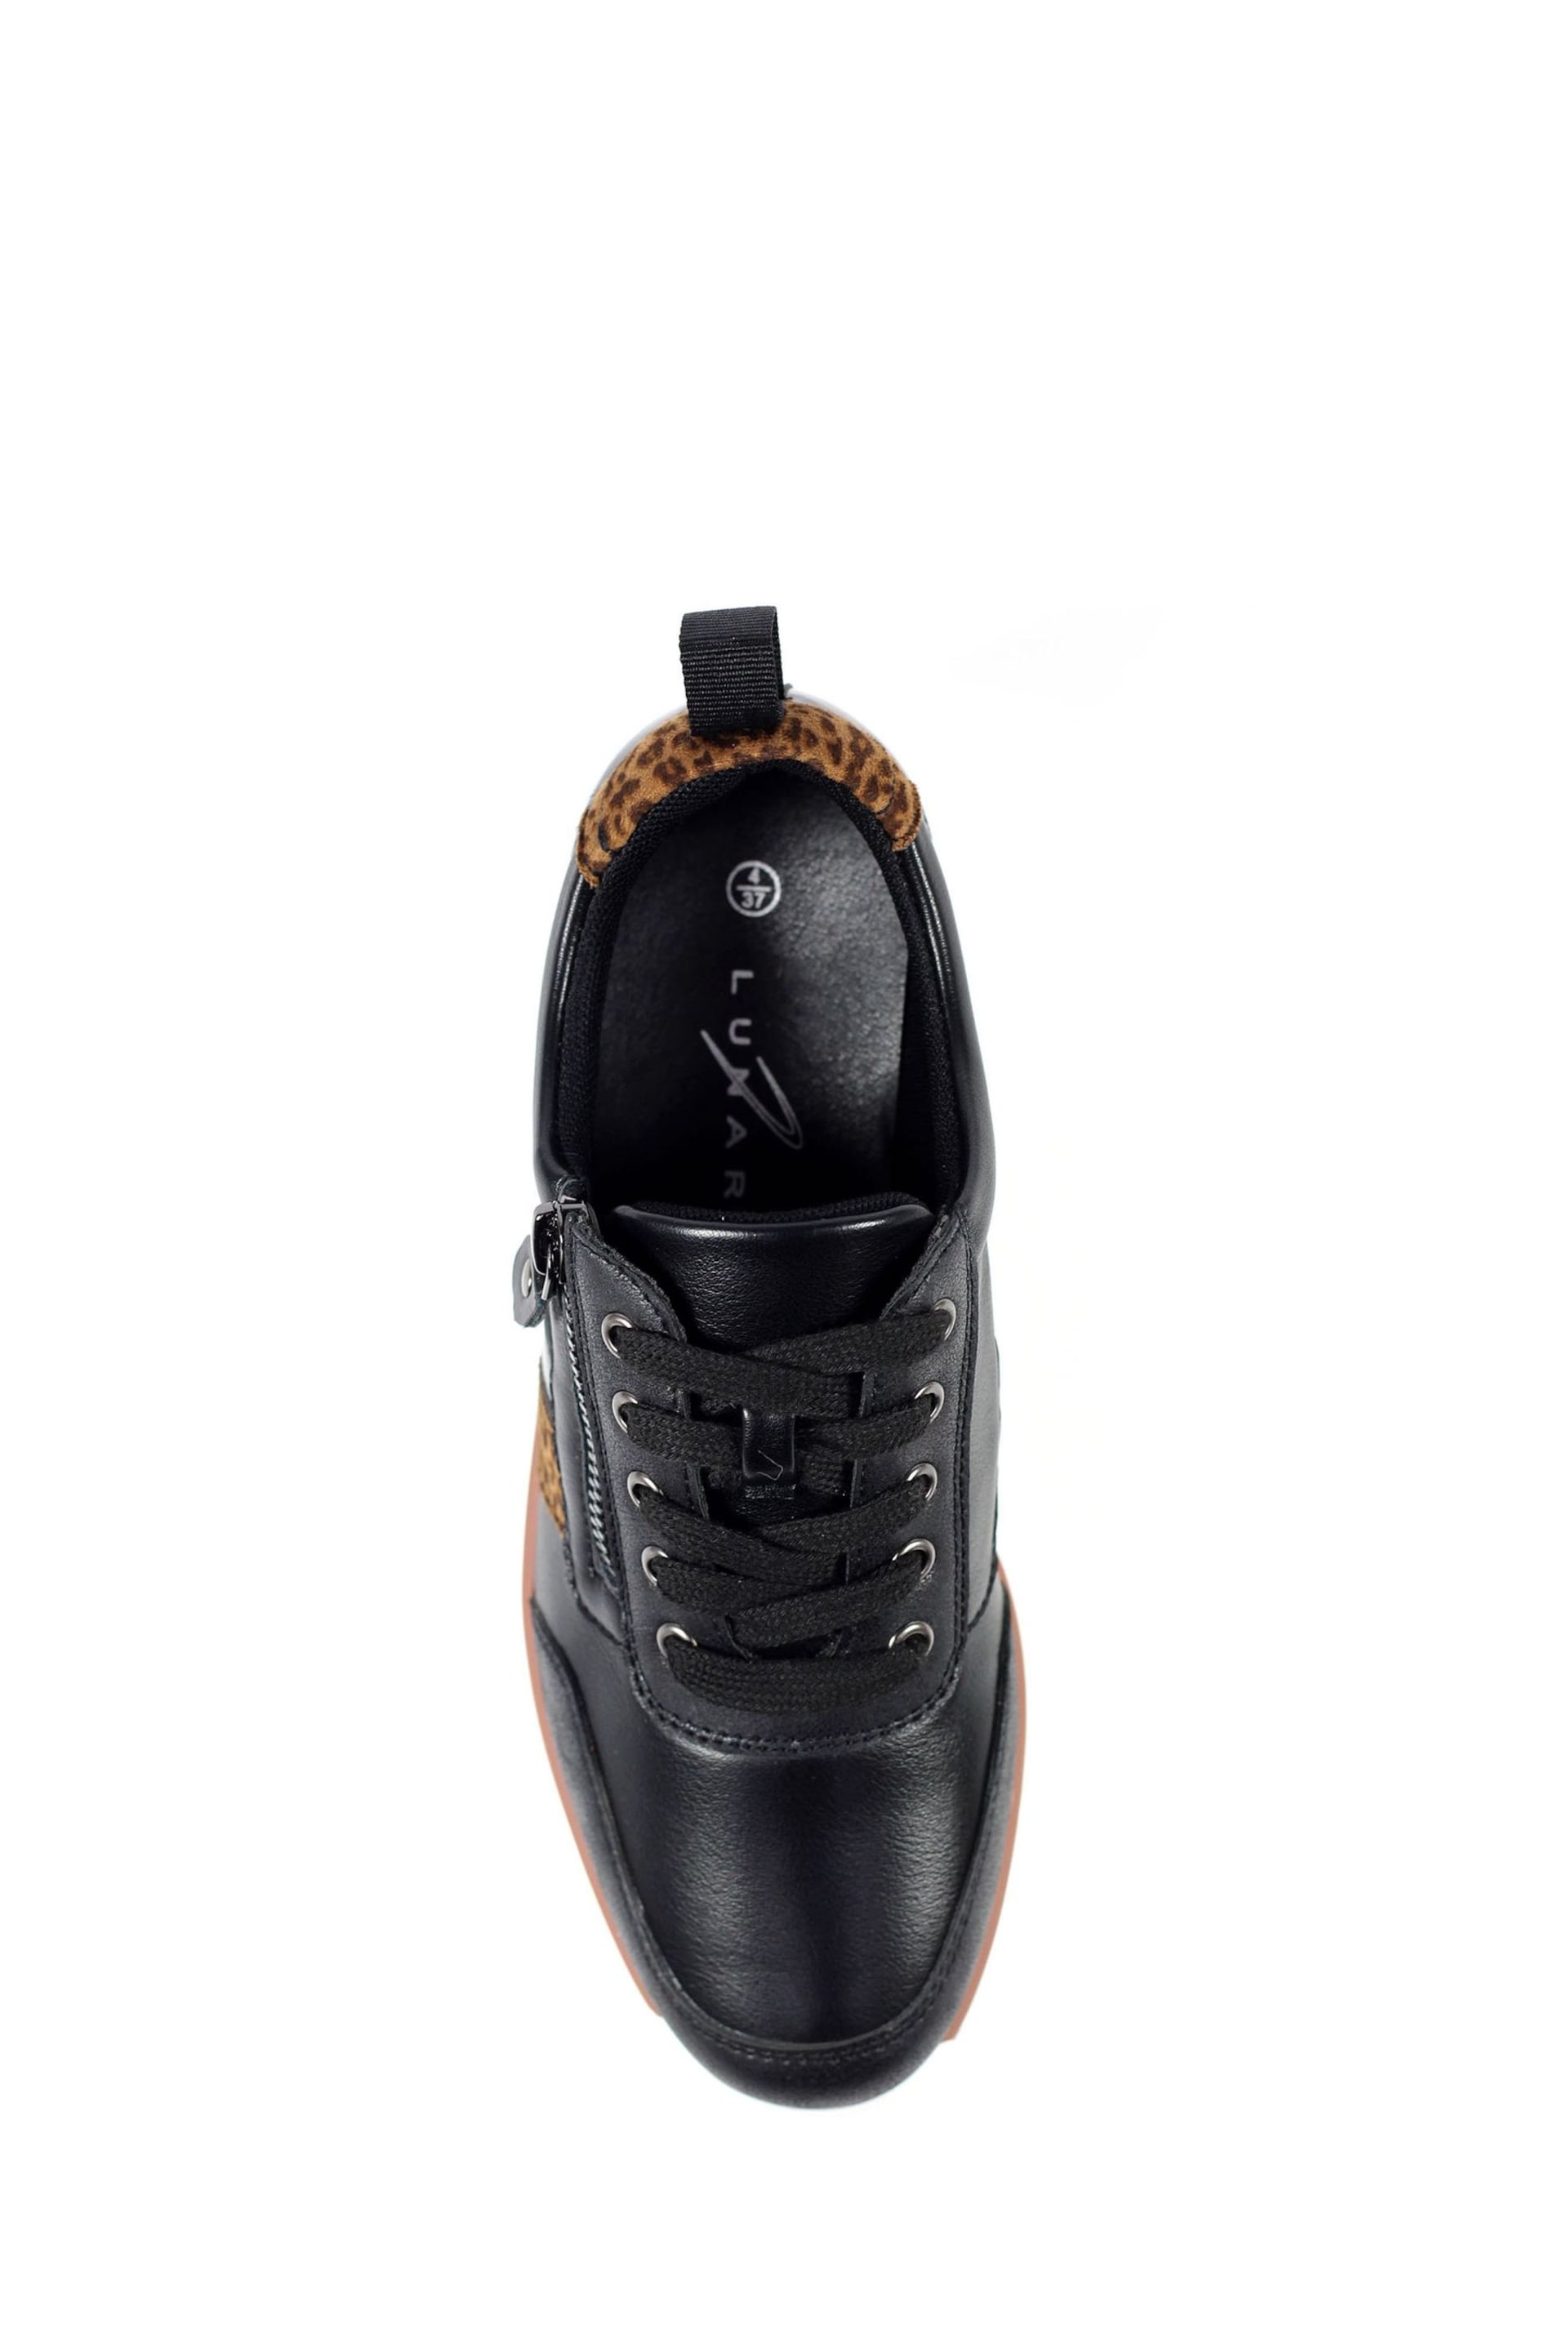 Lunar Rome Faux Leather Black Trainers - Image 6 of 8